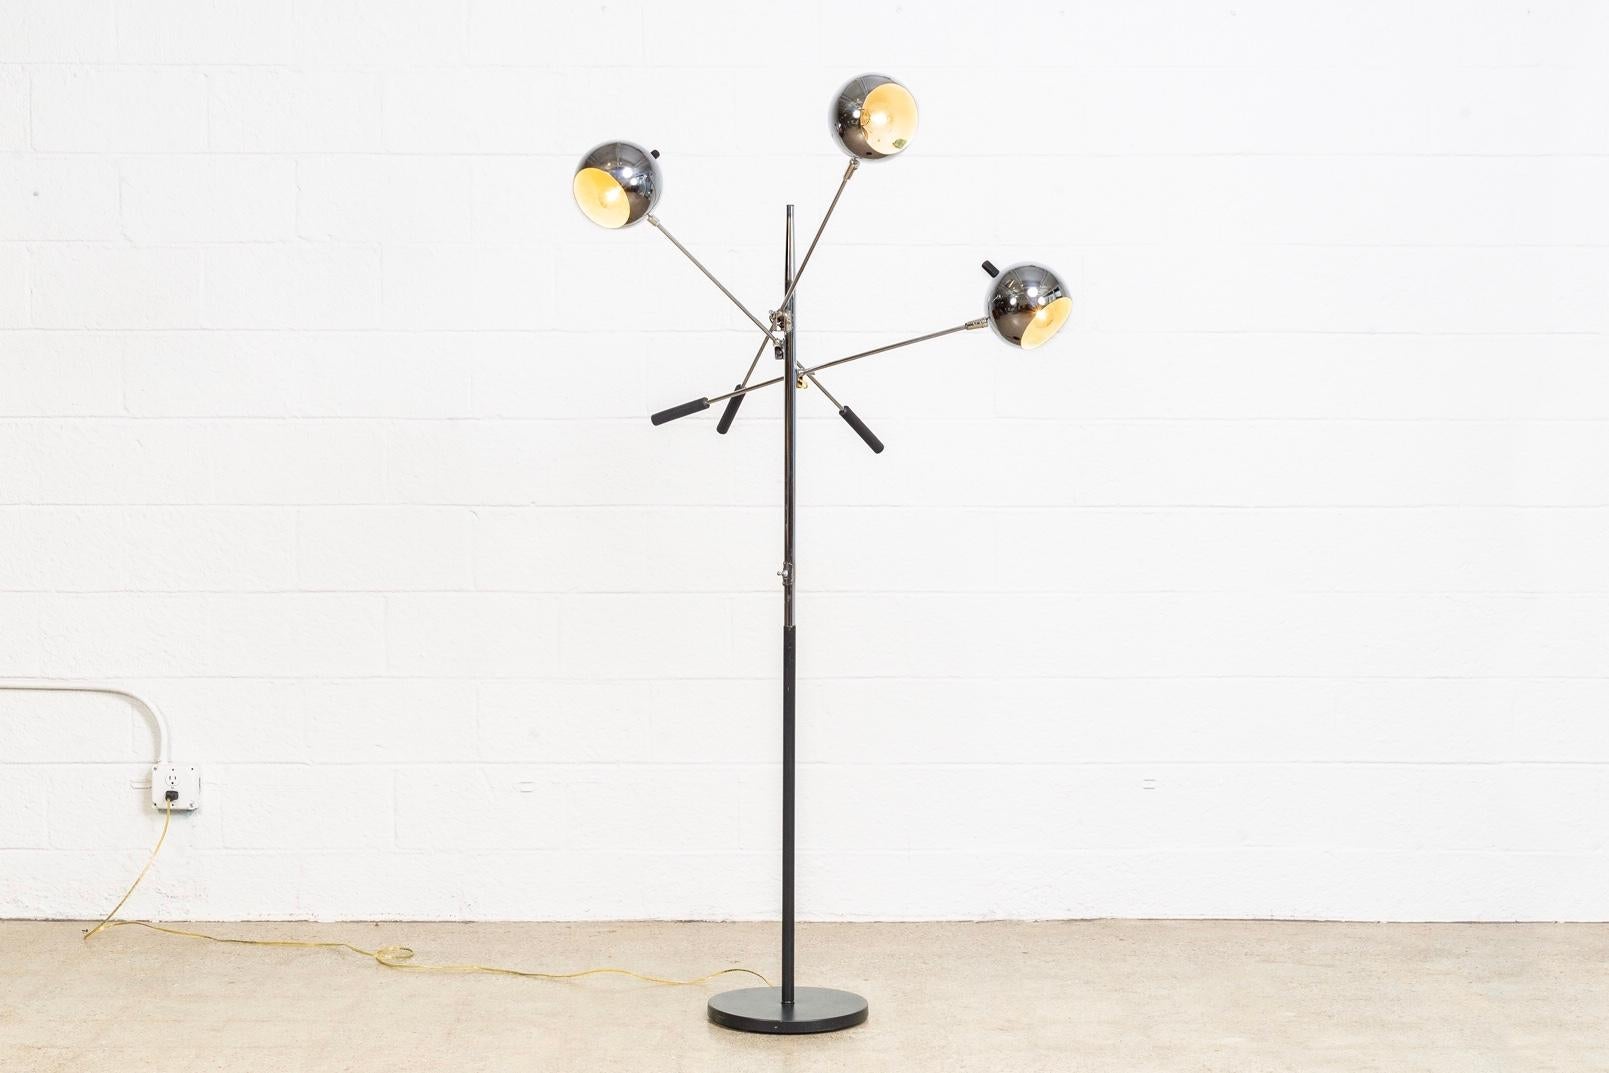 This vintage Mid-Century Modern Triennale floor lamp attributed to Robert Sonneman is circa 1970. It features three chromed orb globe lights on adjustable, counter-balanced lever arms. Lamp arms adjust up and down and orb lampshades pivot both up